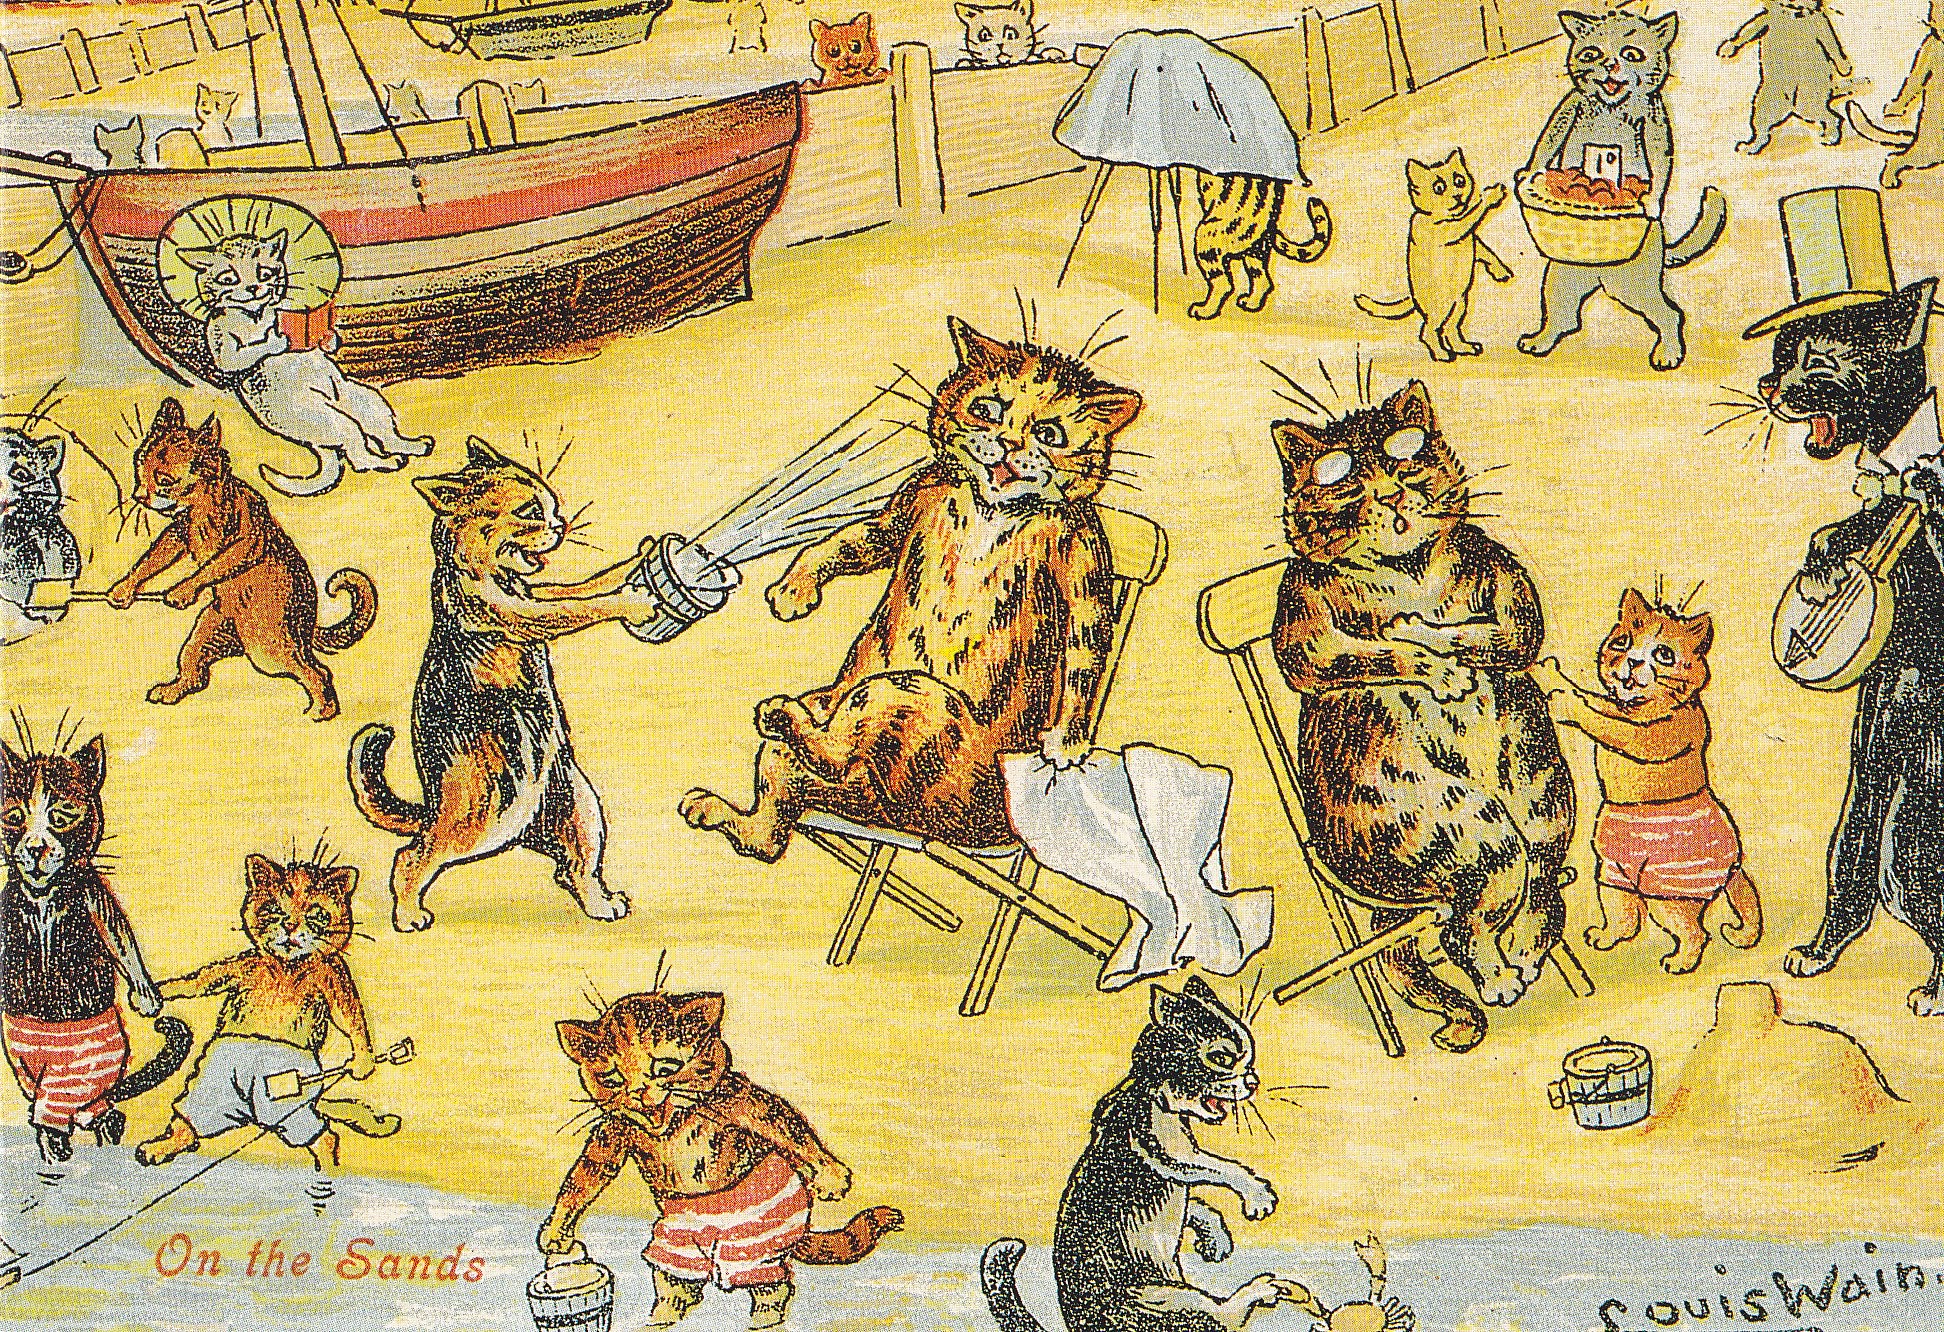 Louis Wain illustration with: beach, boat, book_item, camera, caption, carrying, cat, cat:calico, cat:tabby, cat:tuxedo, clothes, clothes:bowtie, clothes:glasses, clothes:hat, color:black, color:brown, color:orange, crab, frightened, fruit, humanised, kitten, manysubjects, meta:has_source, meta:needsyear, music:singing, music:string, outdoors, postcard, profile, reading, signature, sleeping, smiling, subject:music, toy, umbrella, unhappy